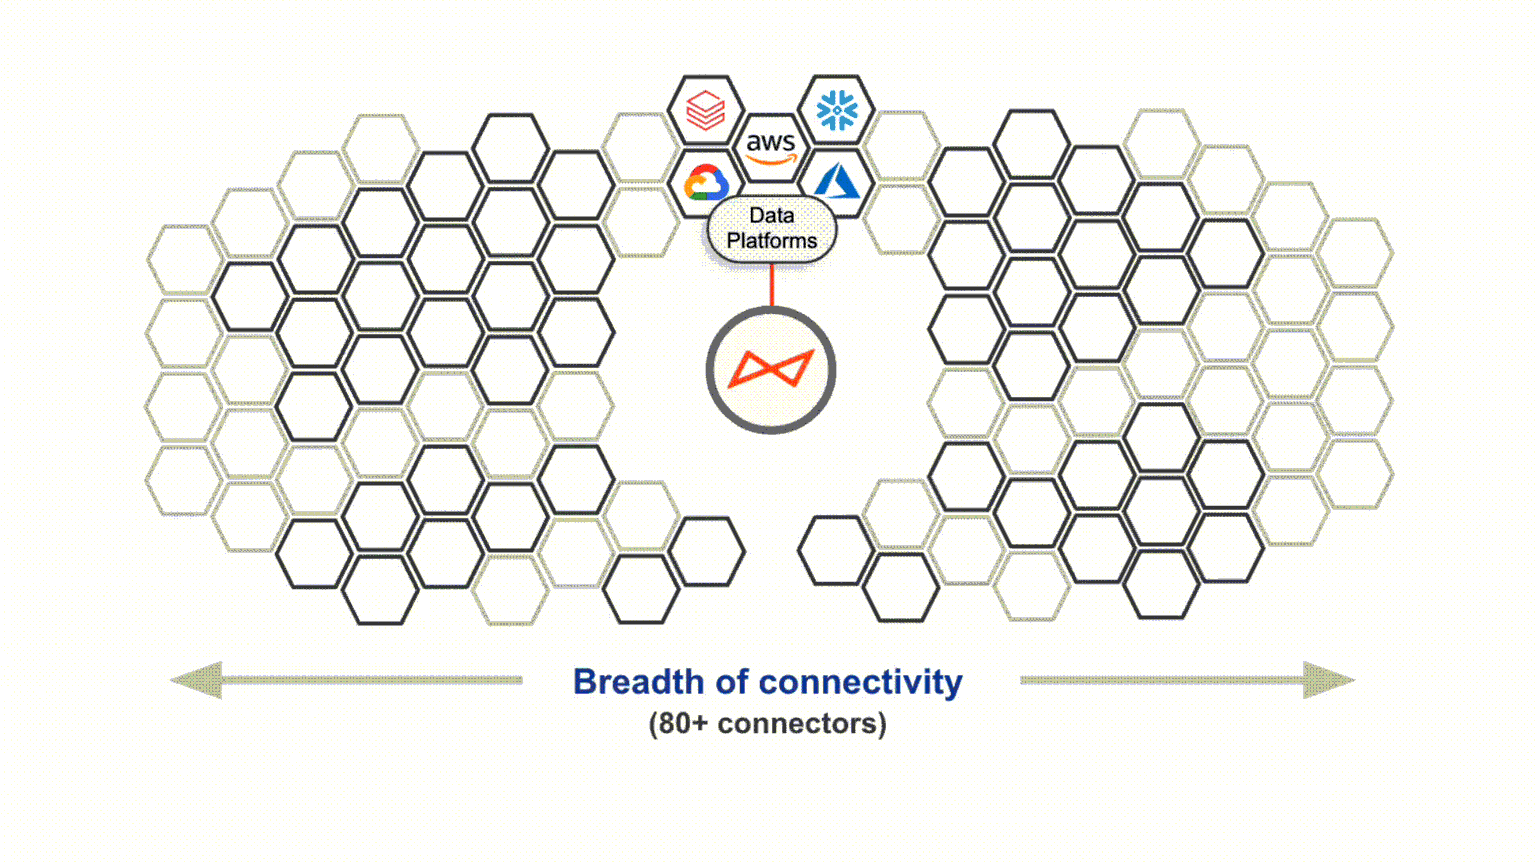 Modern data stack of cloud complexity crisis showcasing the Open Connectors and the Breadth of connectivity